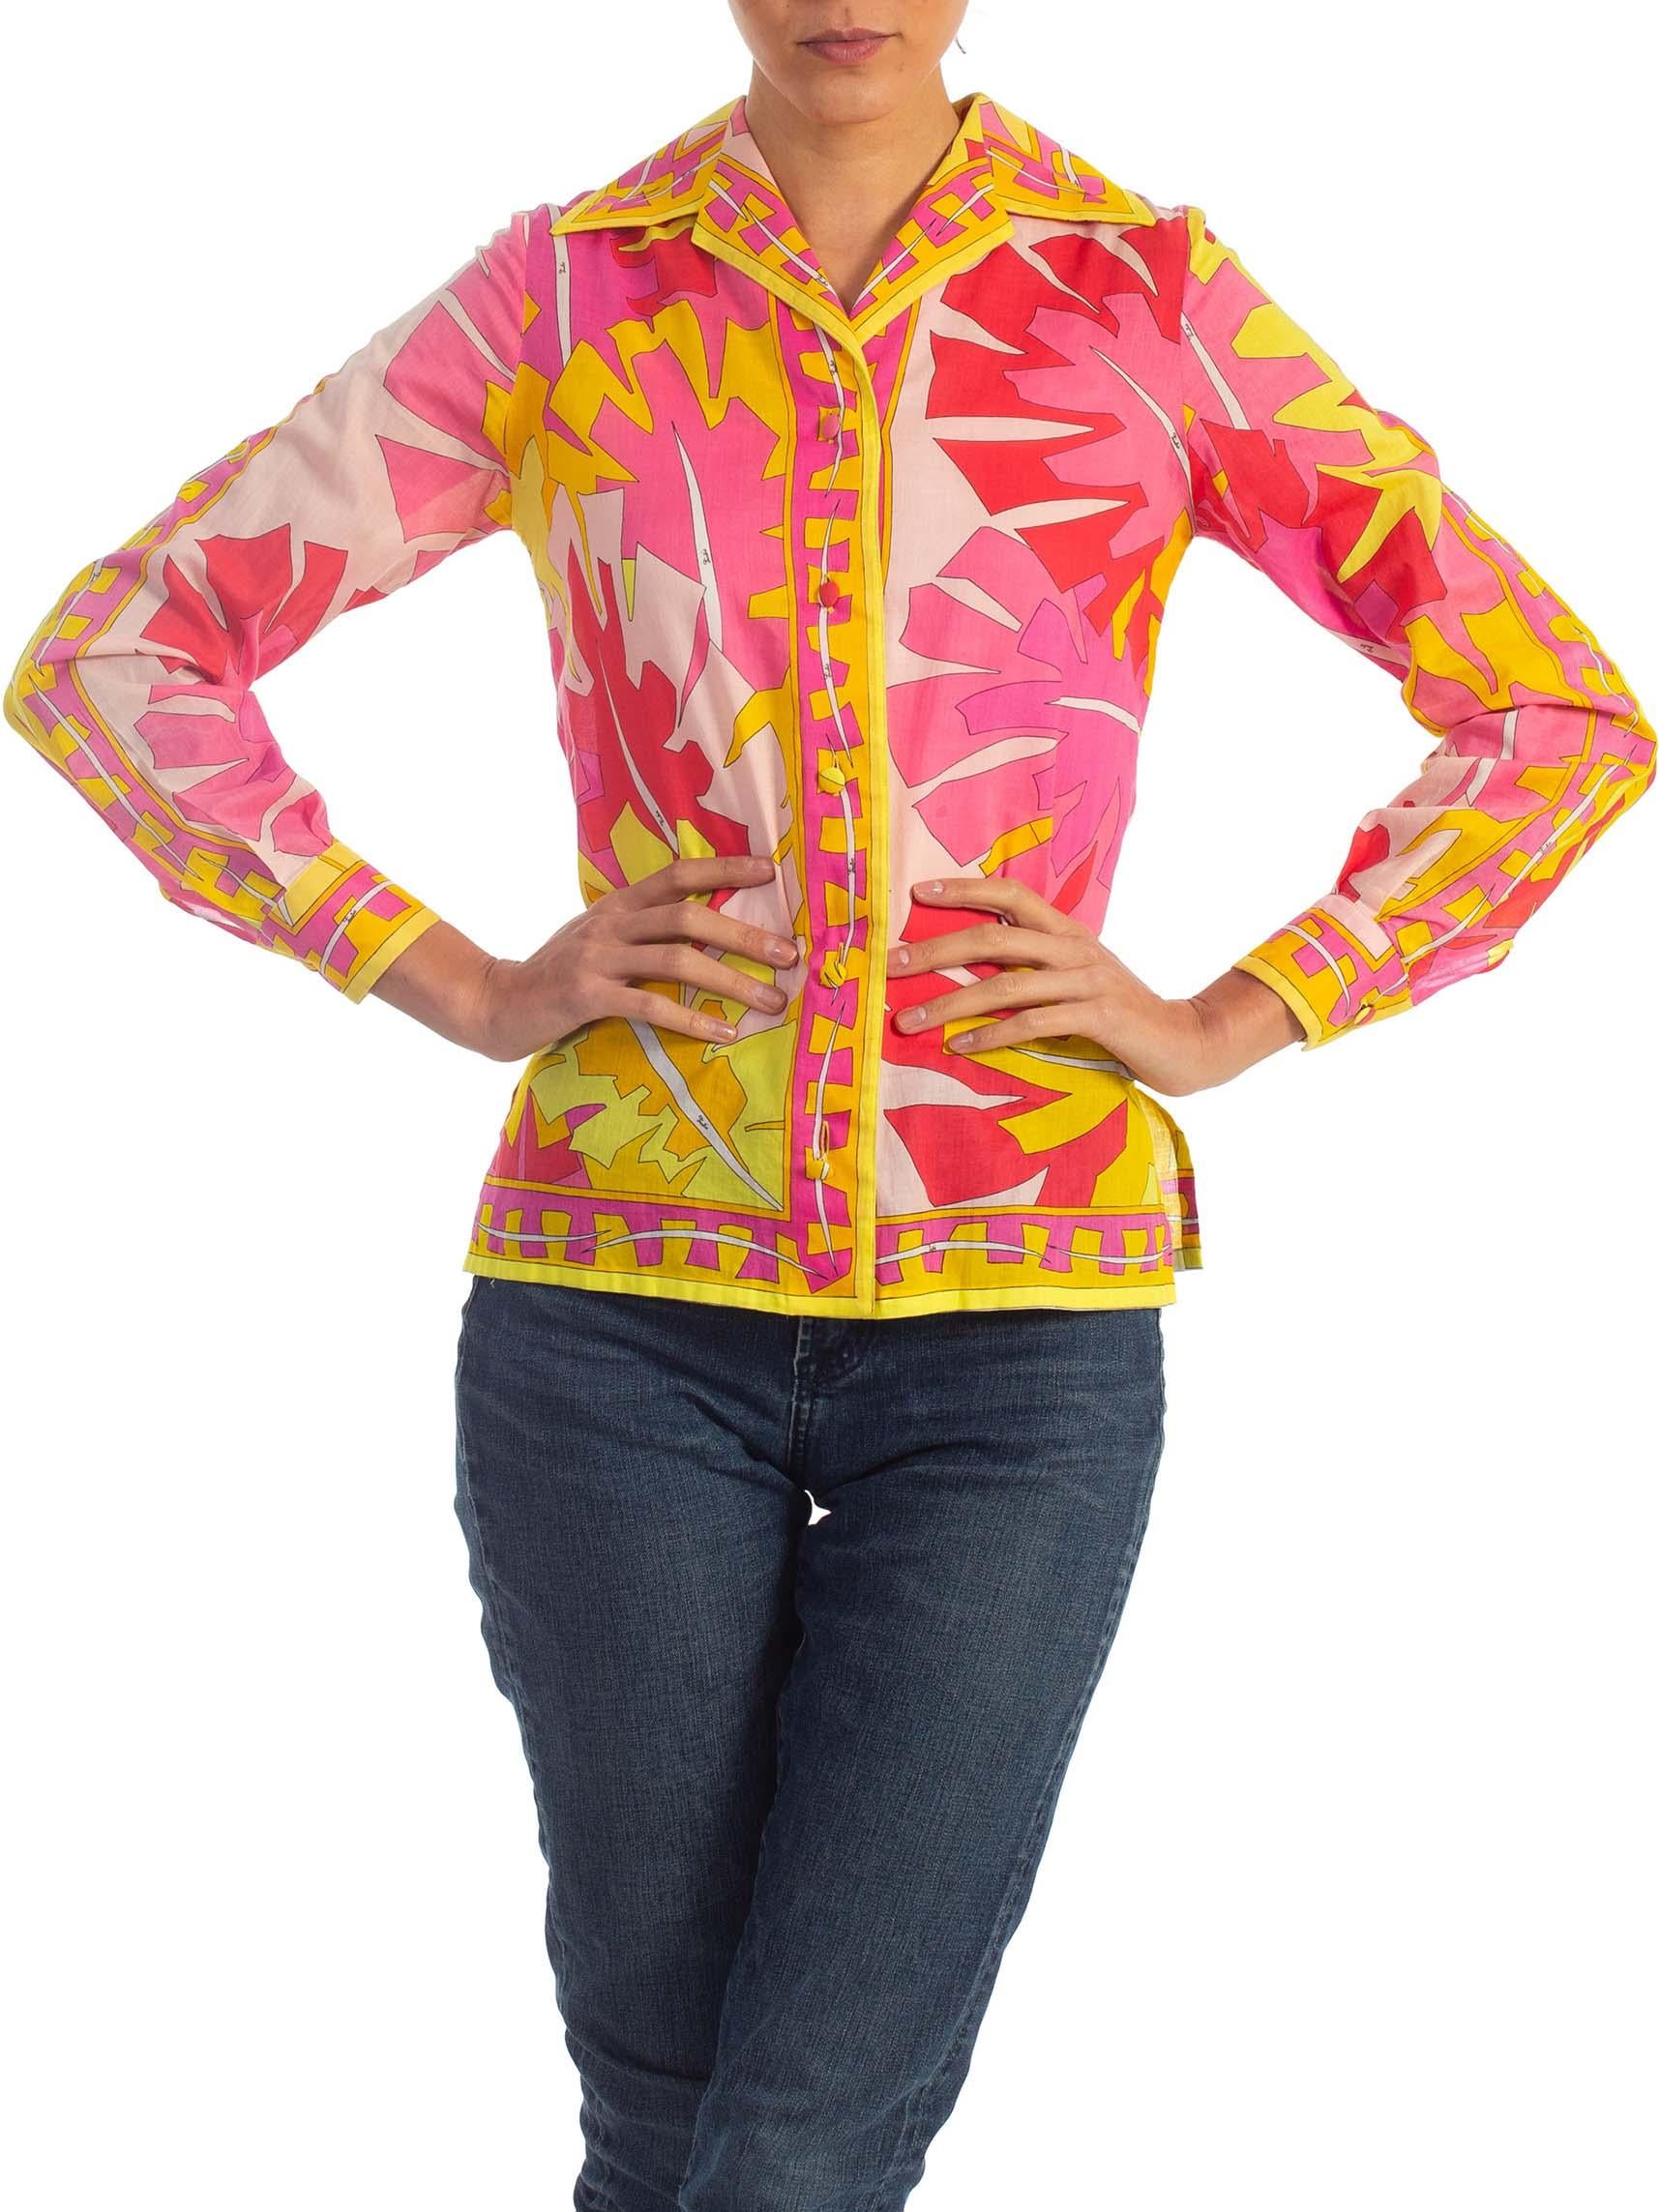 1960'S EMILIO PUCCI Hot Pink & Yellow Cotton Voile Blouse 1